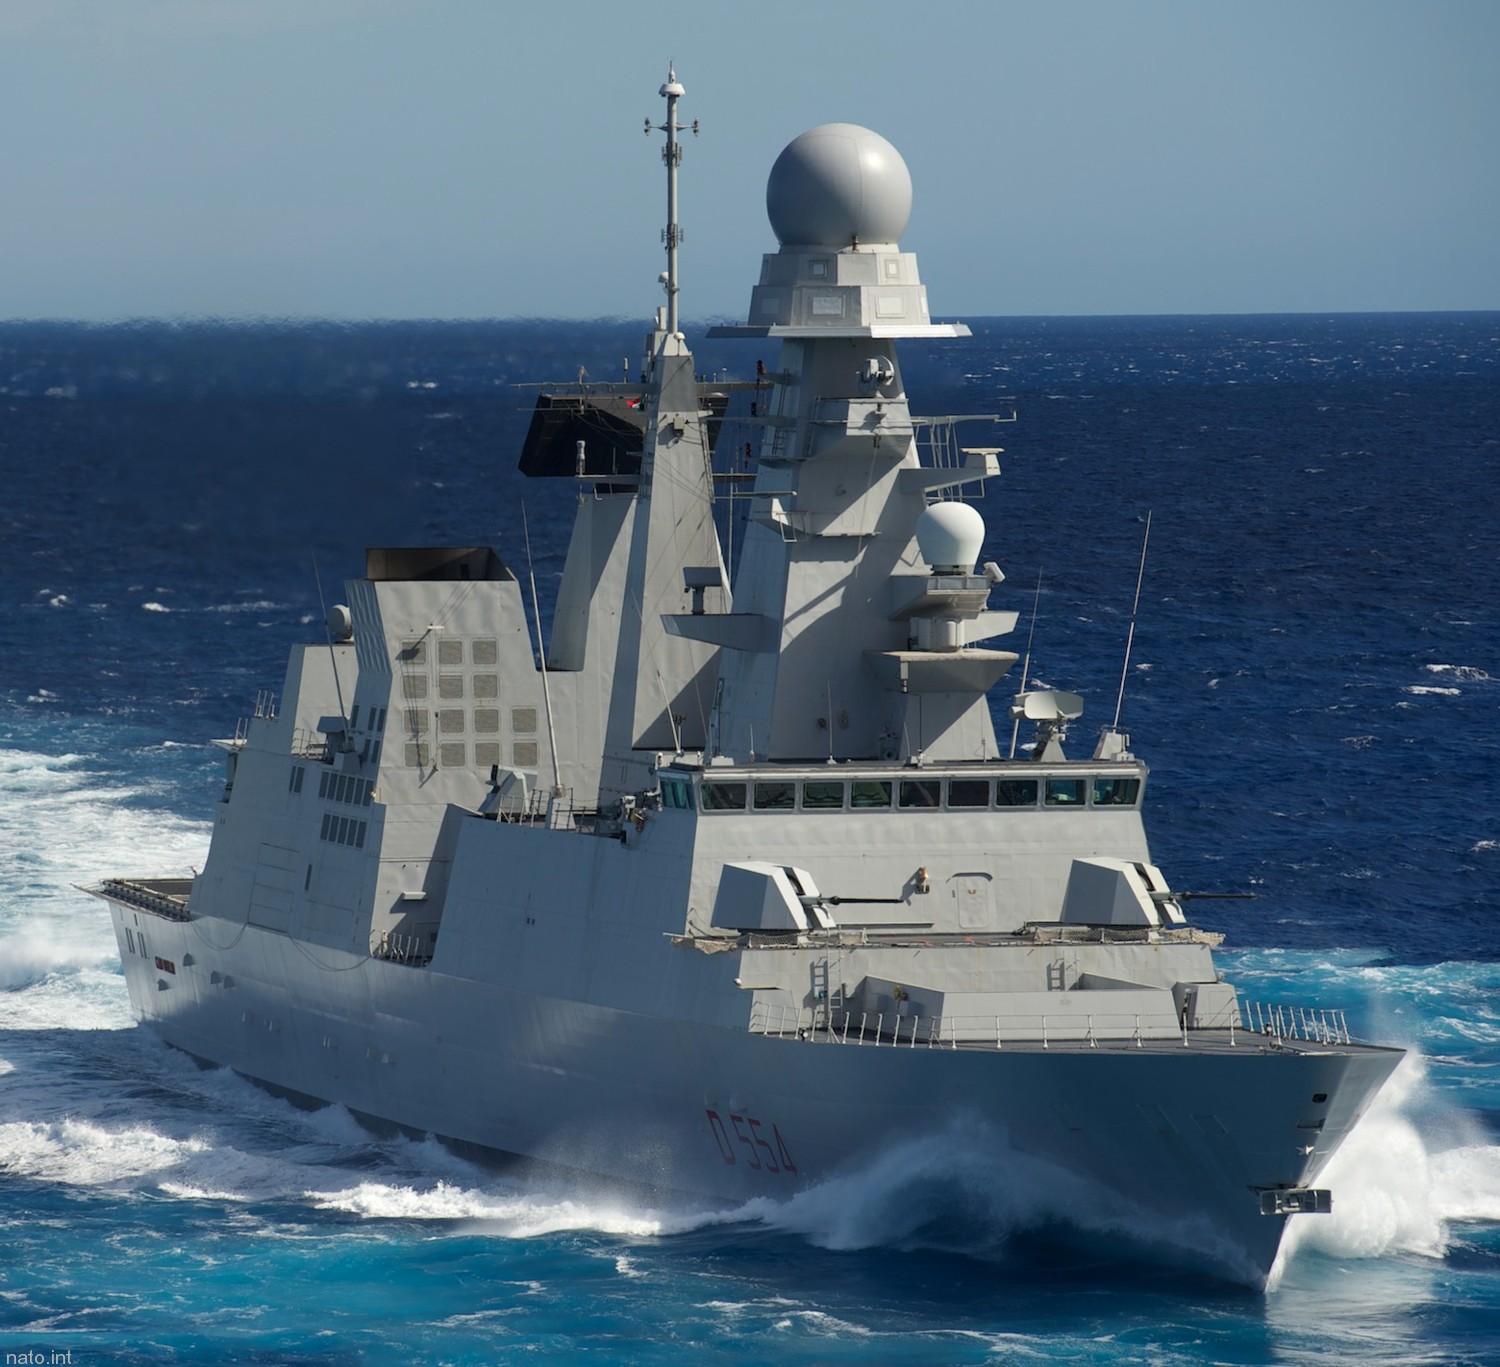 d-554 caio duilio its nave horizon class guided missile destroyer italian navy 06